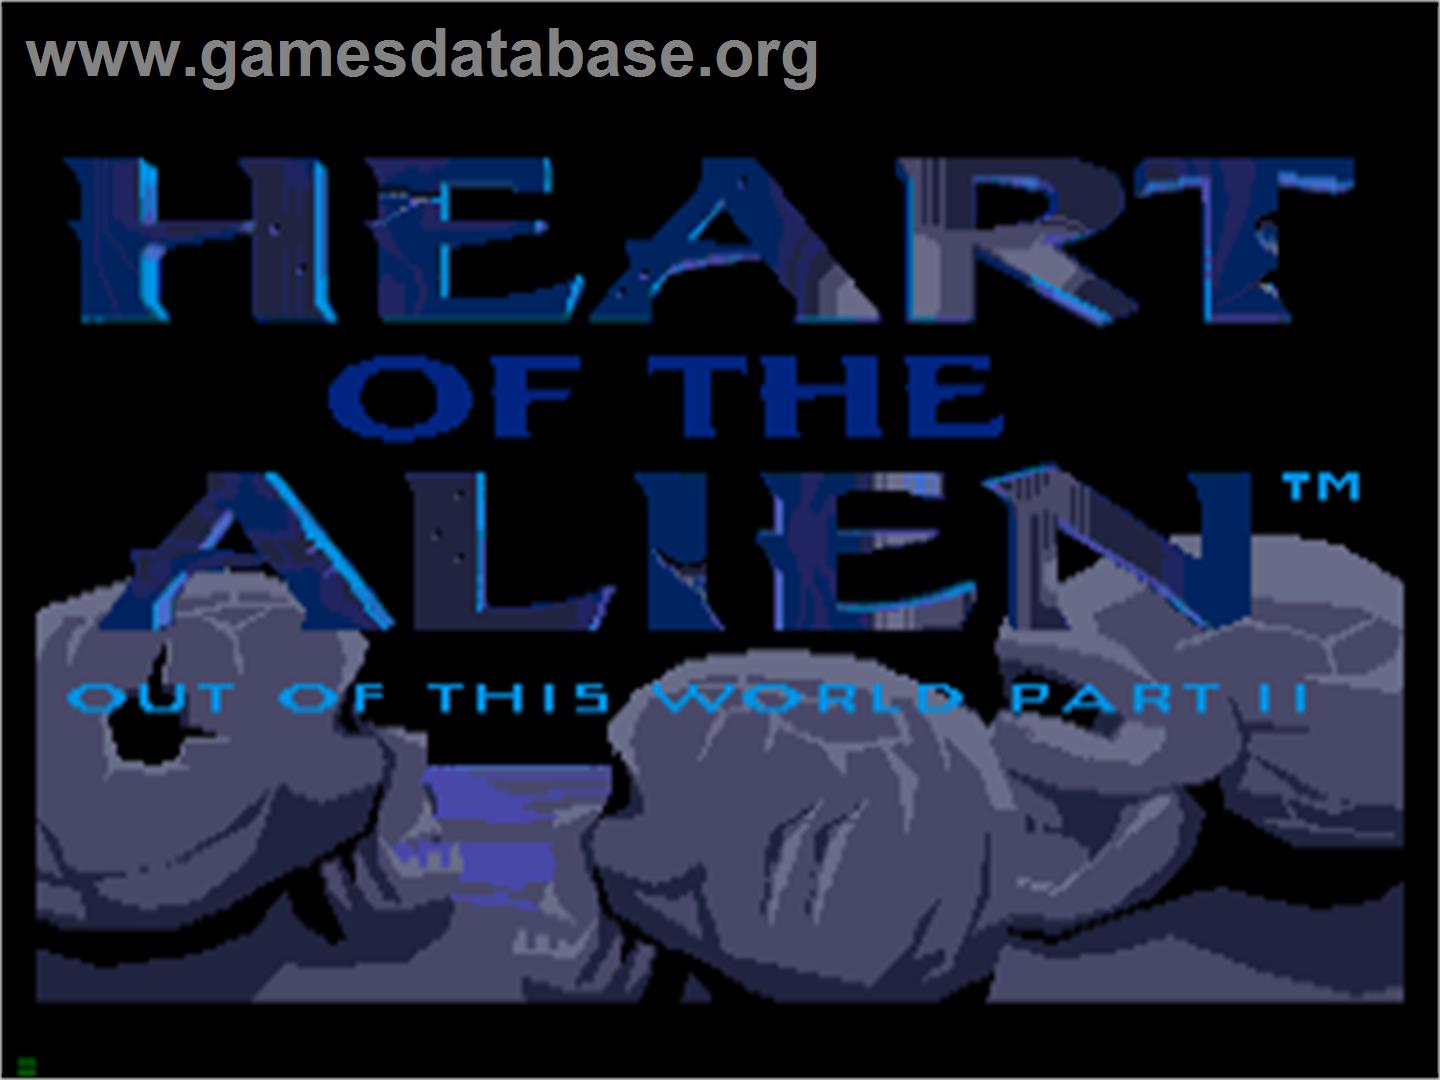 Heart of the Alien: Out of this World parts I and 2 - Sega CD - Artwork - Title Screen